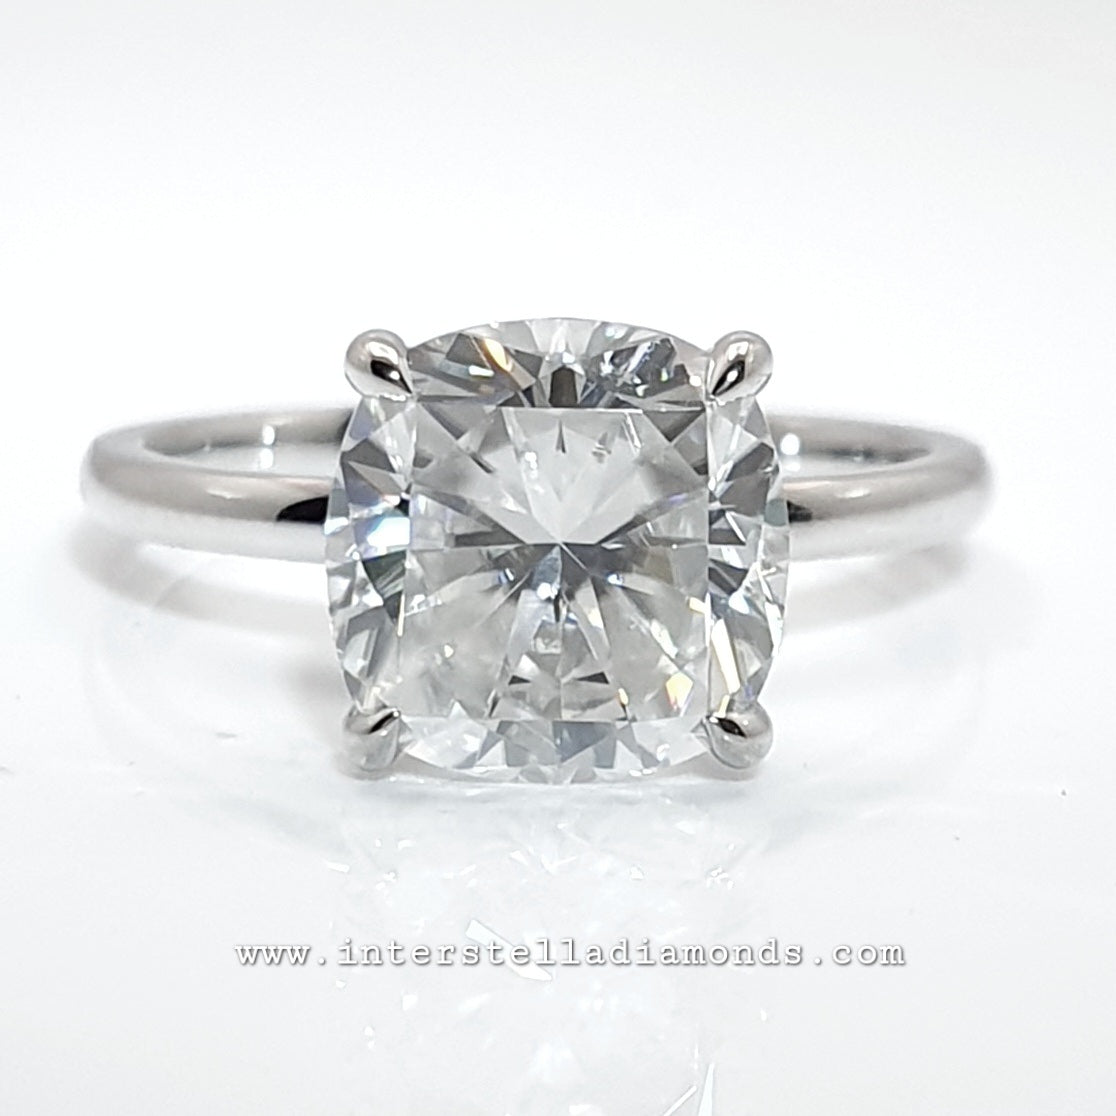 Solitaire 2.85ct Cushion Cut Engagement Ring